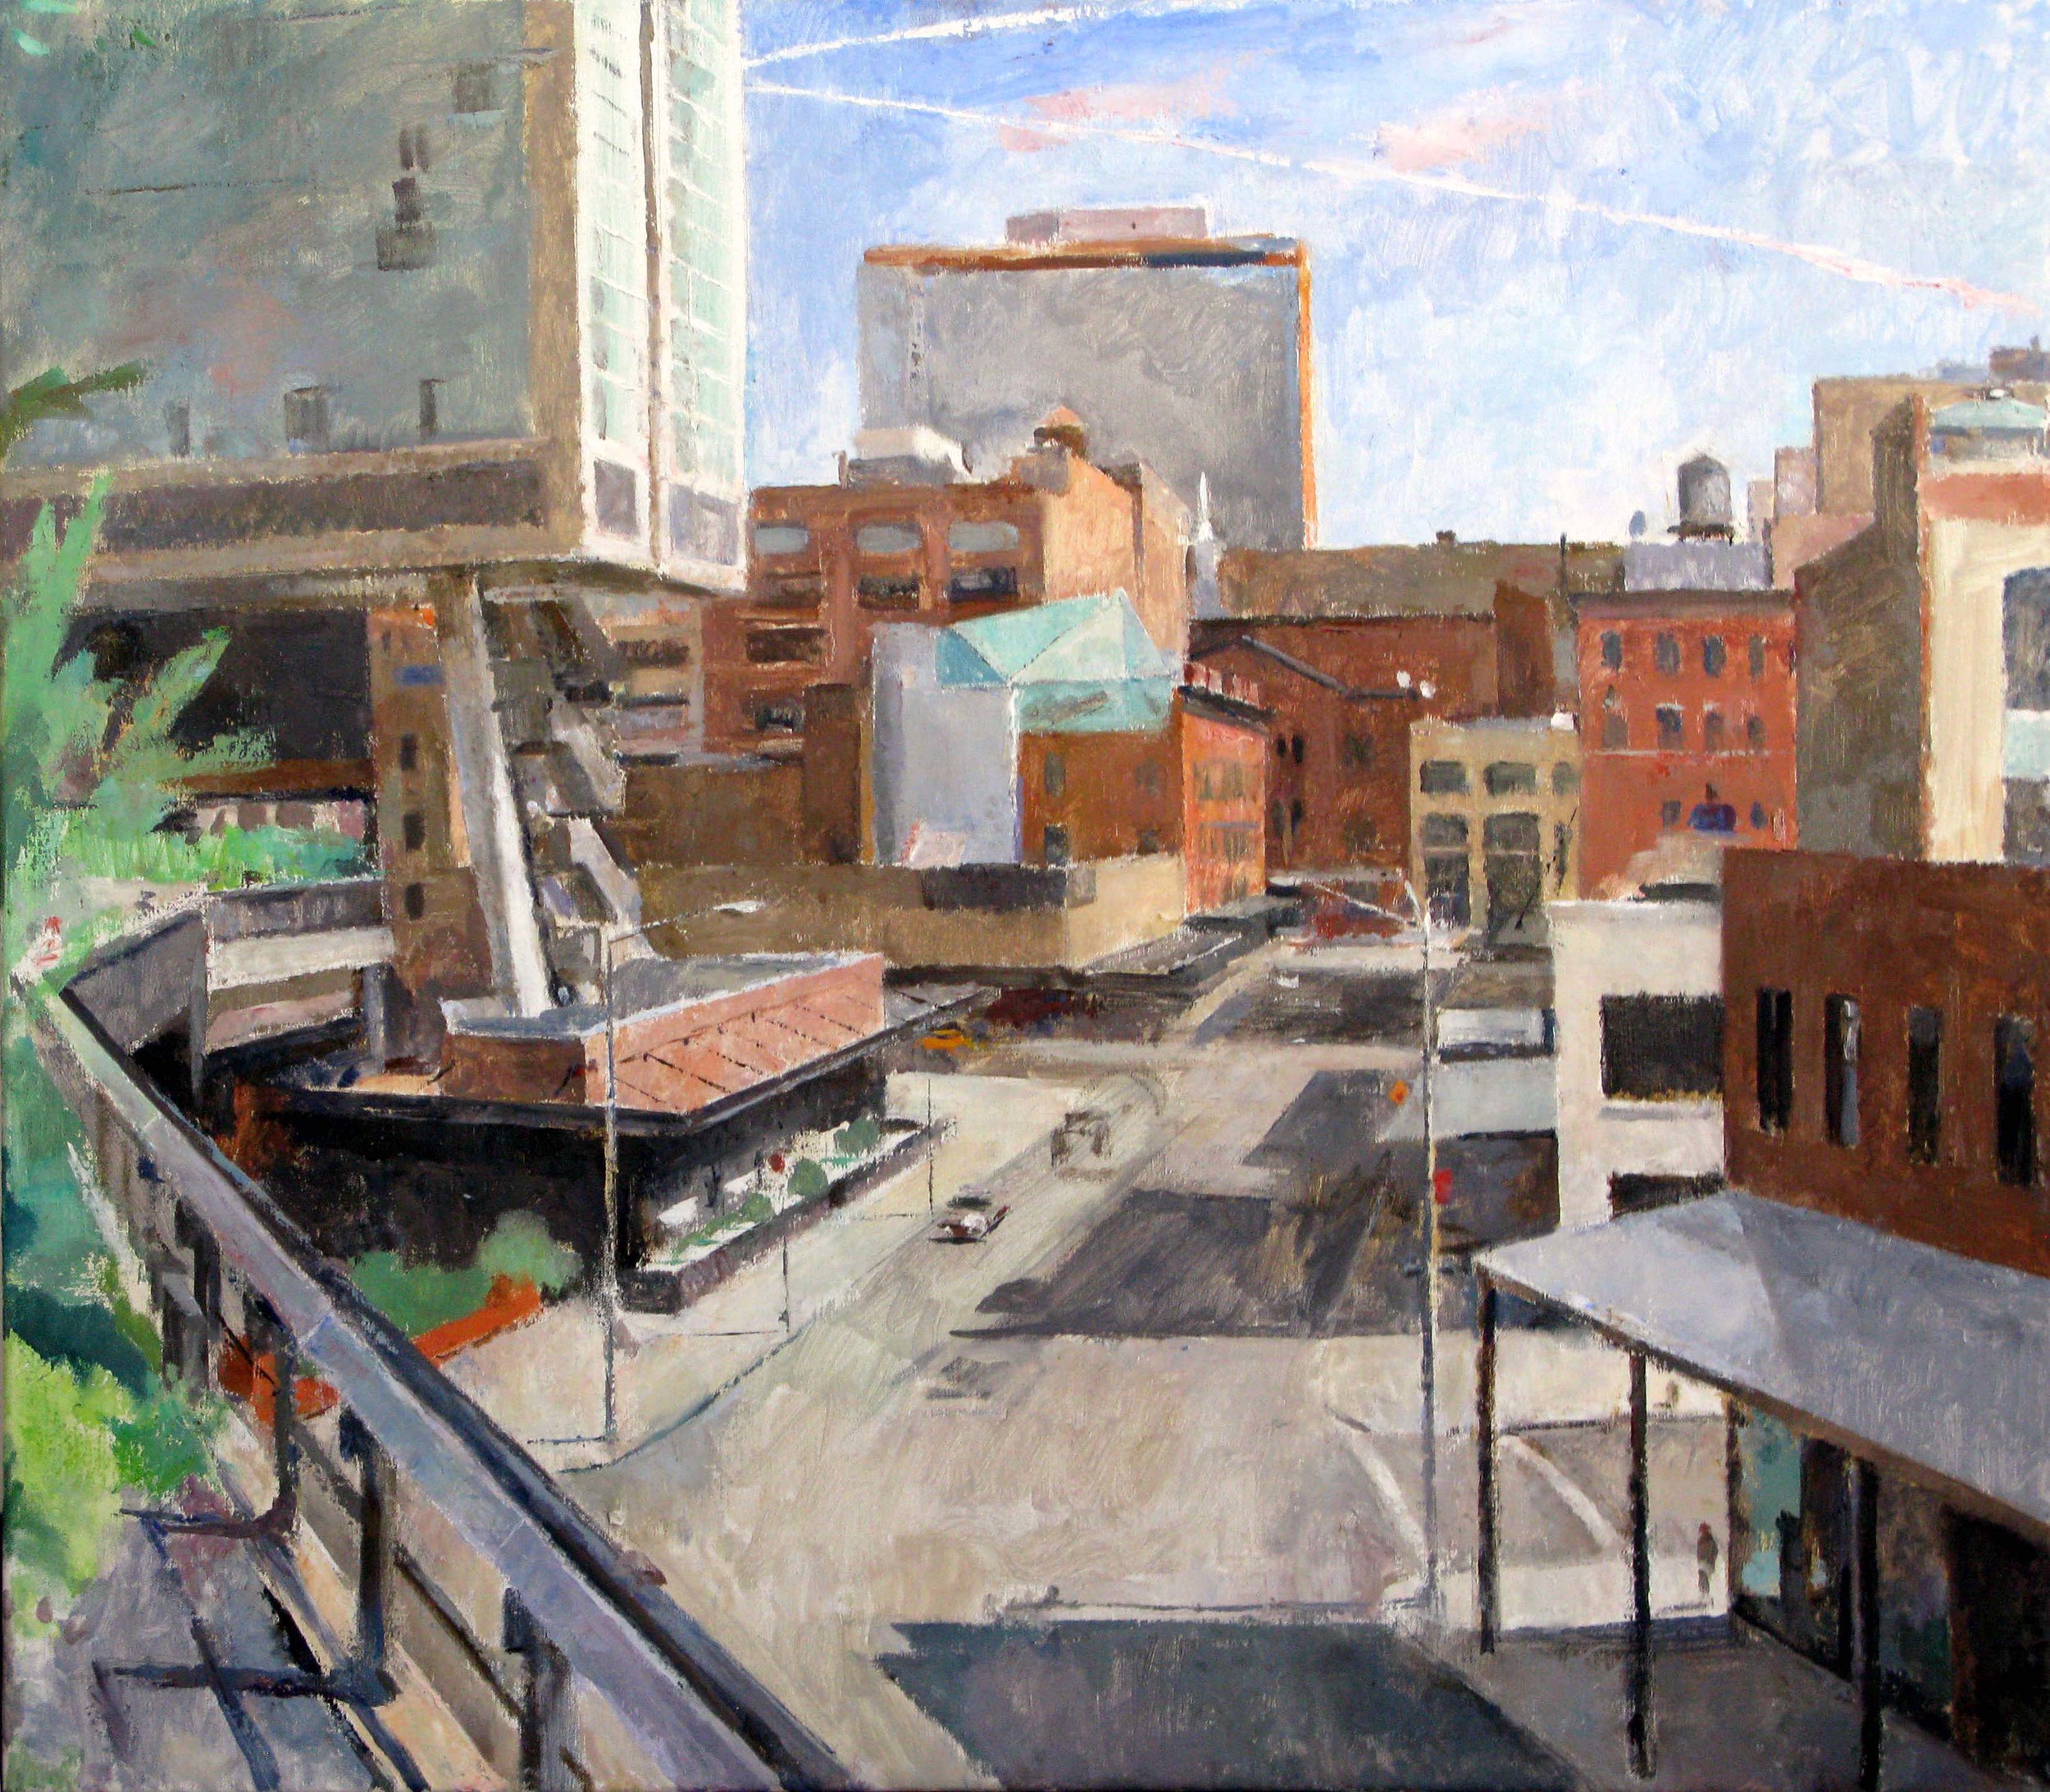 Washington Street from the High Line, 31 x 35 inches, 2010.